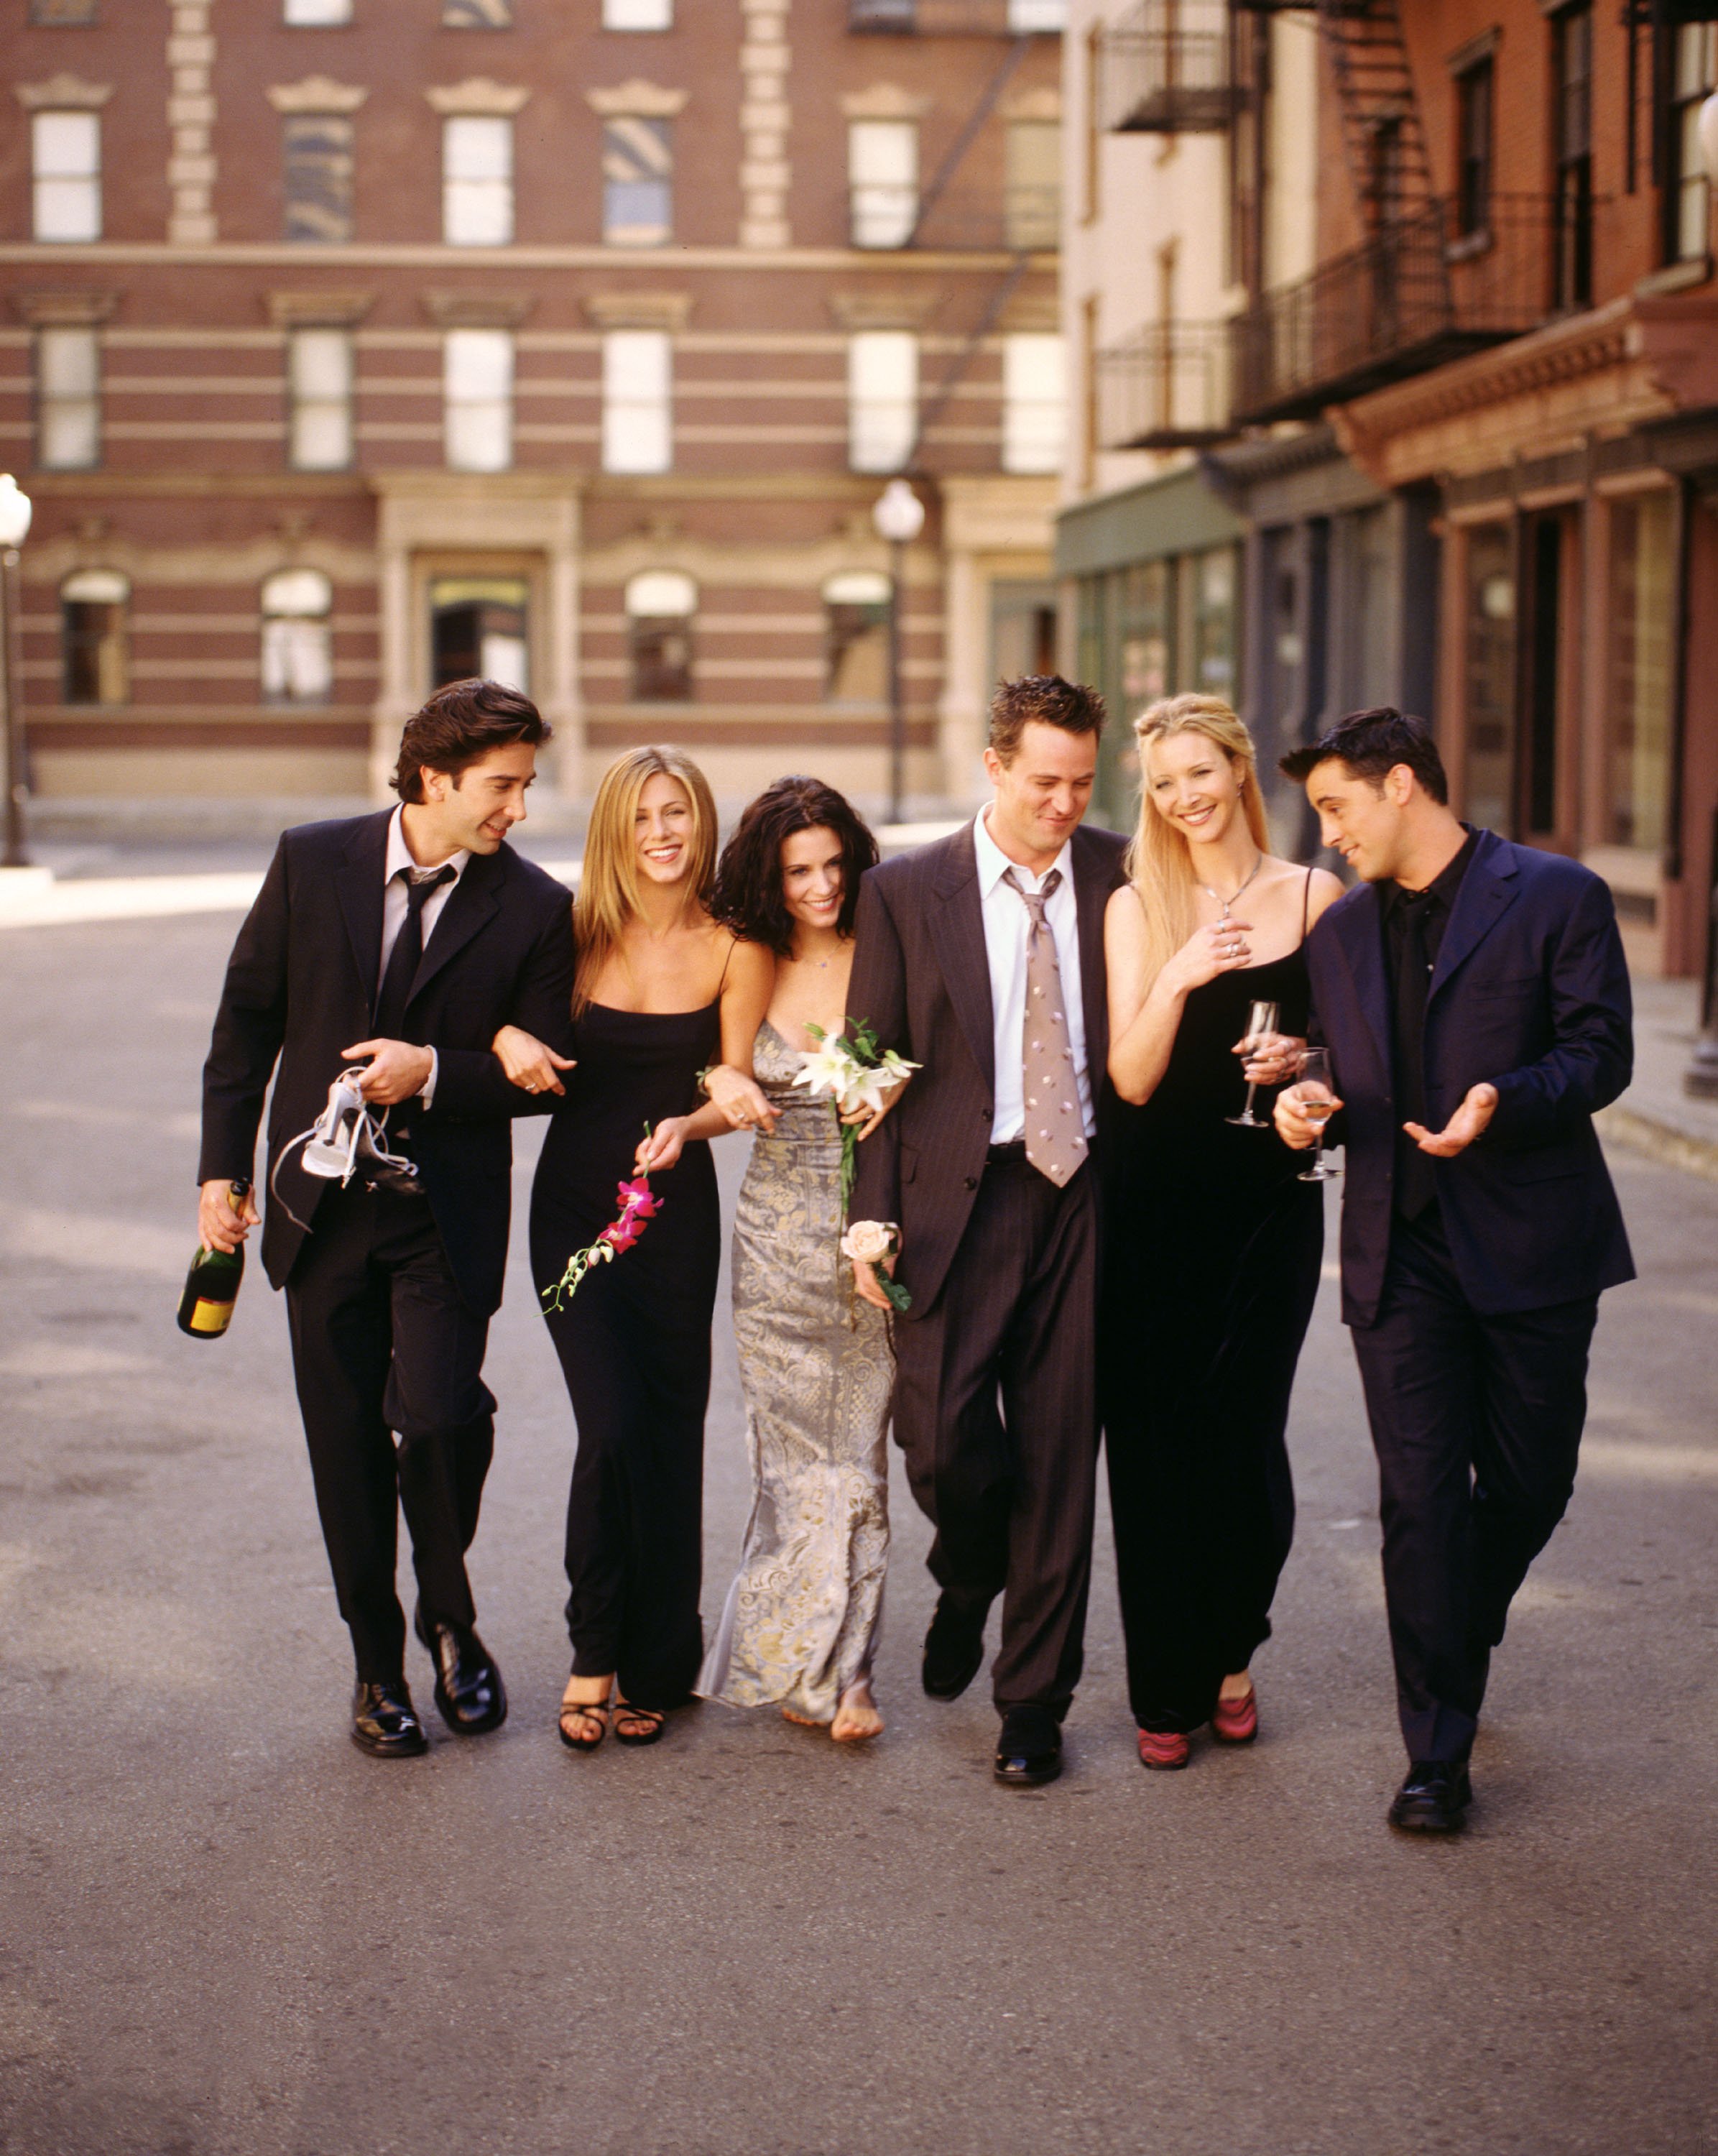 Cast members of NBC's comedy series "Friends" including David Schwimmer, Jennifer Aniston, Courteney Cox, Matthew Perry, Lisa Kudrow, and Matt LeBlanc circa 2001. | Source: Getty Images